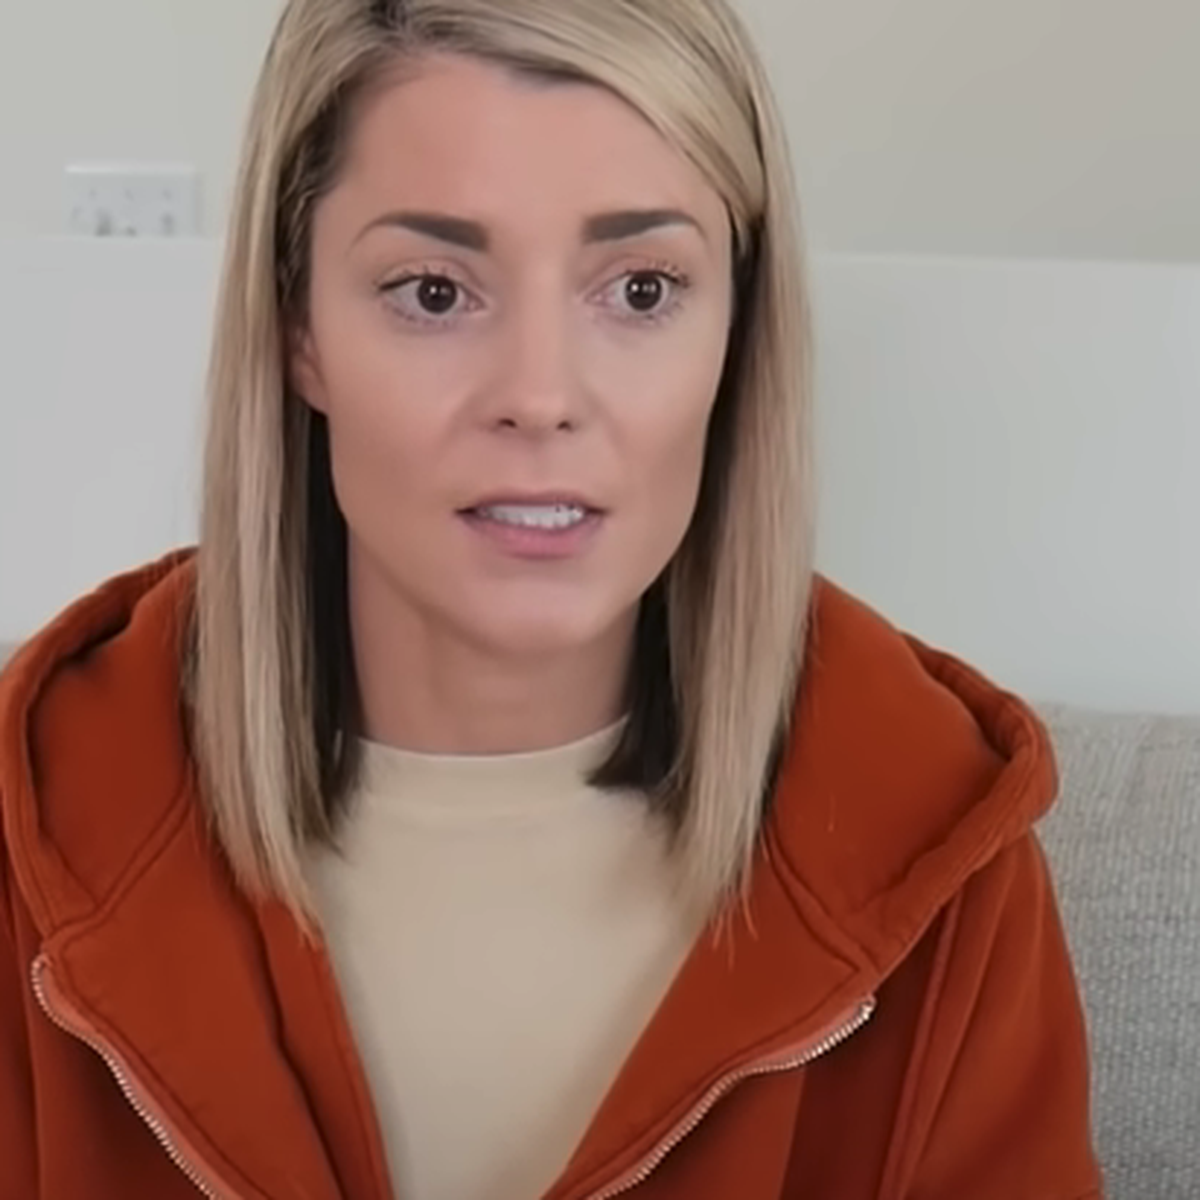 Star Grace Helbig Reveals Breast Cancer Diagnosis